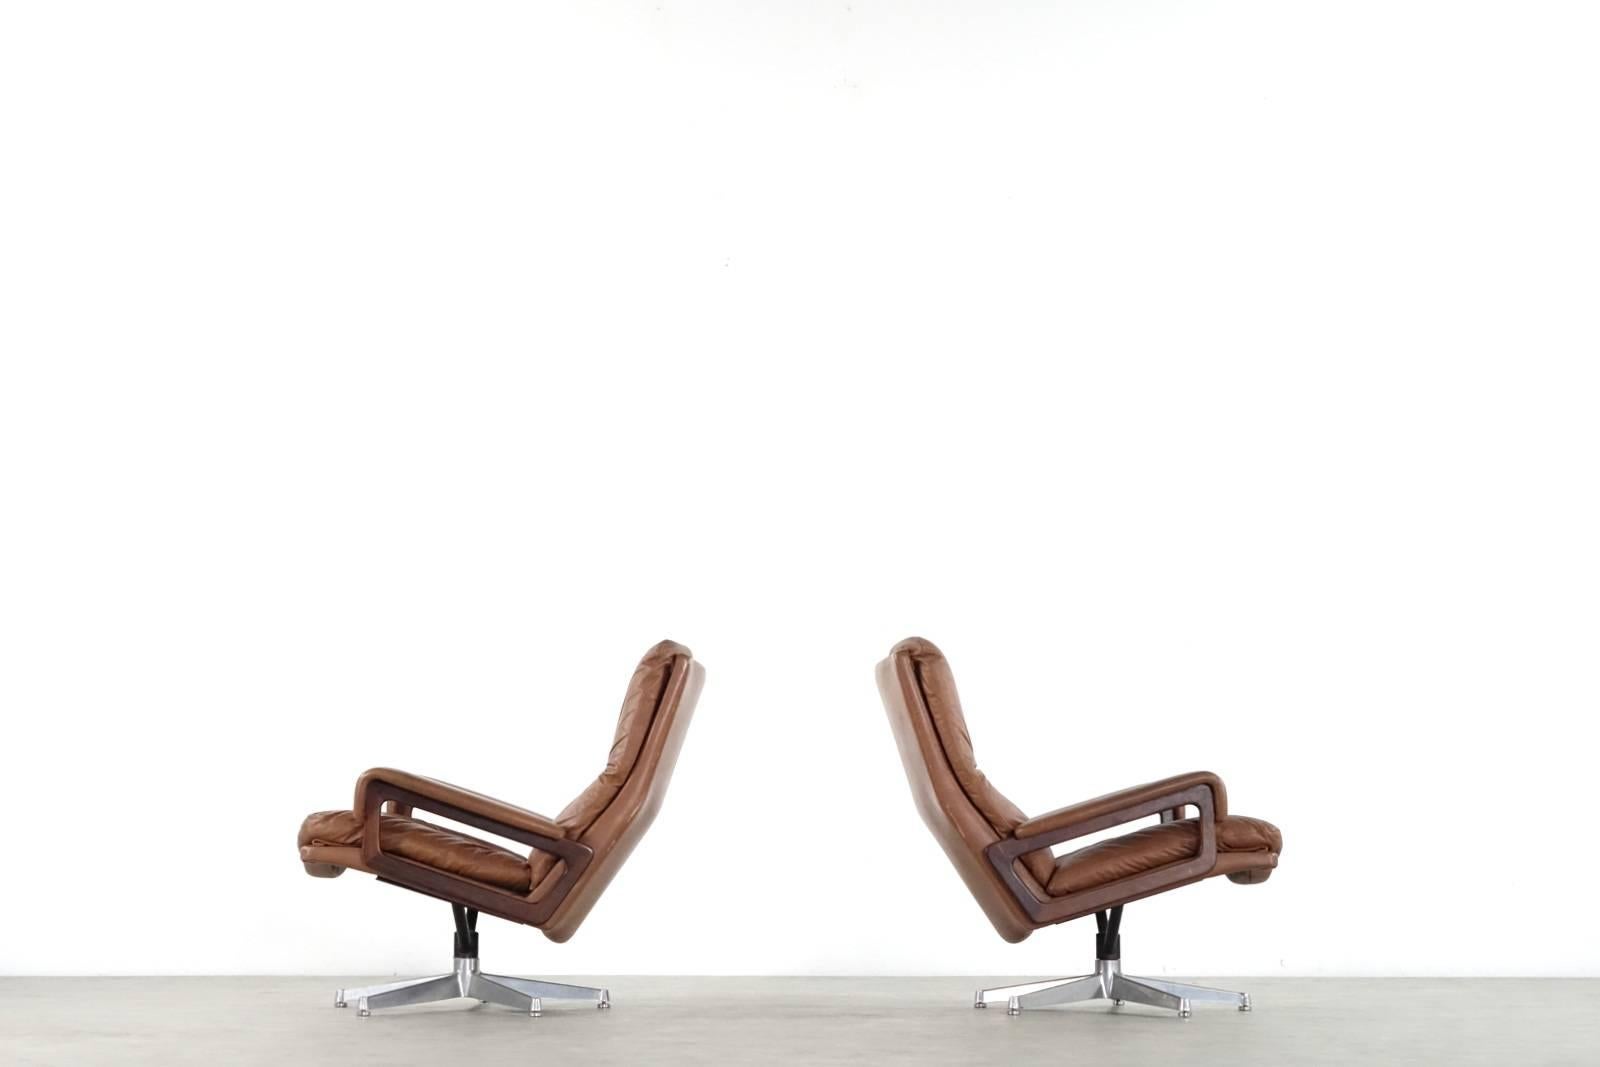 Pair of King chair design Andre Vandenbeuck for Collection Strässle Internat.

Incredibly high-end craftsmanship and sophisticated details with rosewood armrests. Partly filled with down feathers which makes the King chair very